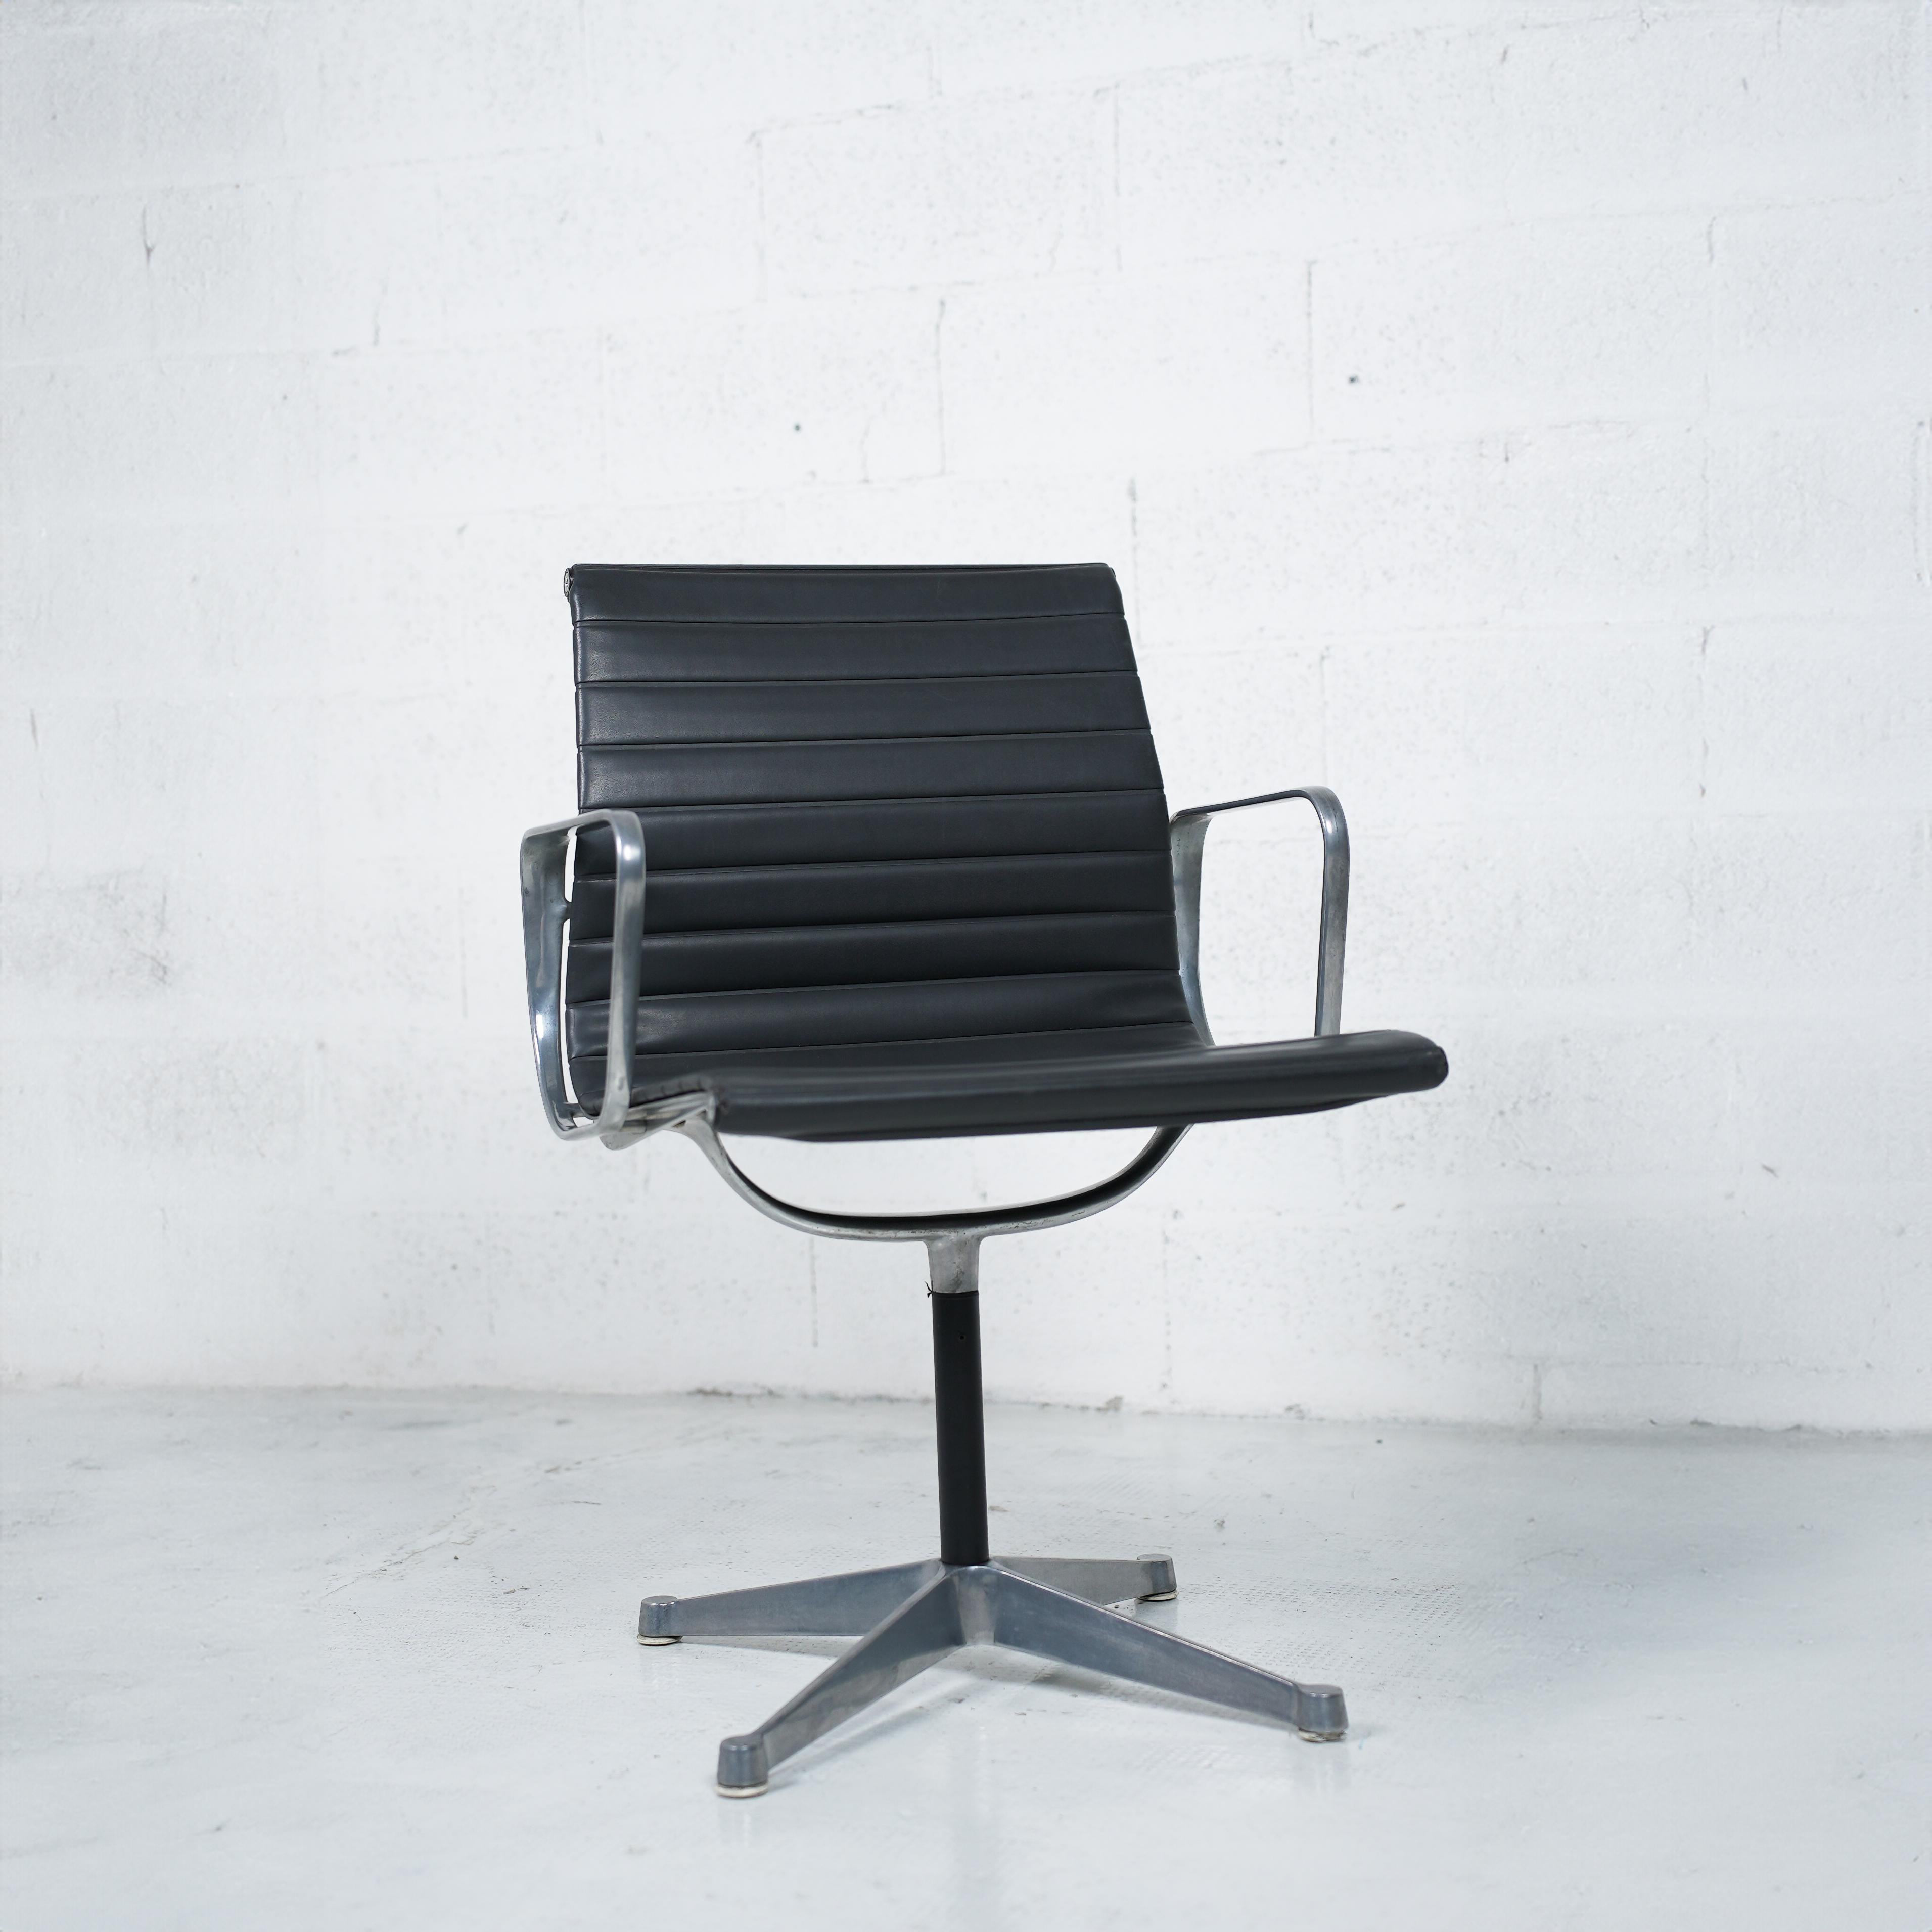 American Pair of aluminium chairs EA 108 by Charles and Ray Eames  for Herman Miller- 60s For Sale